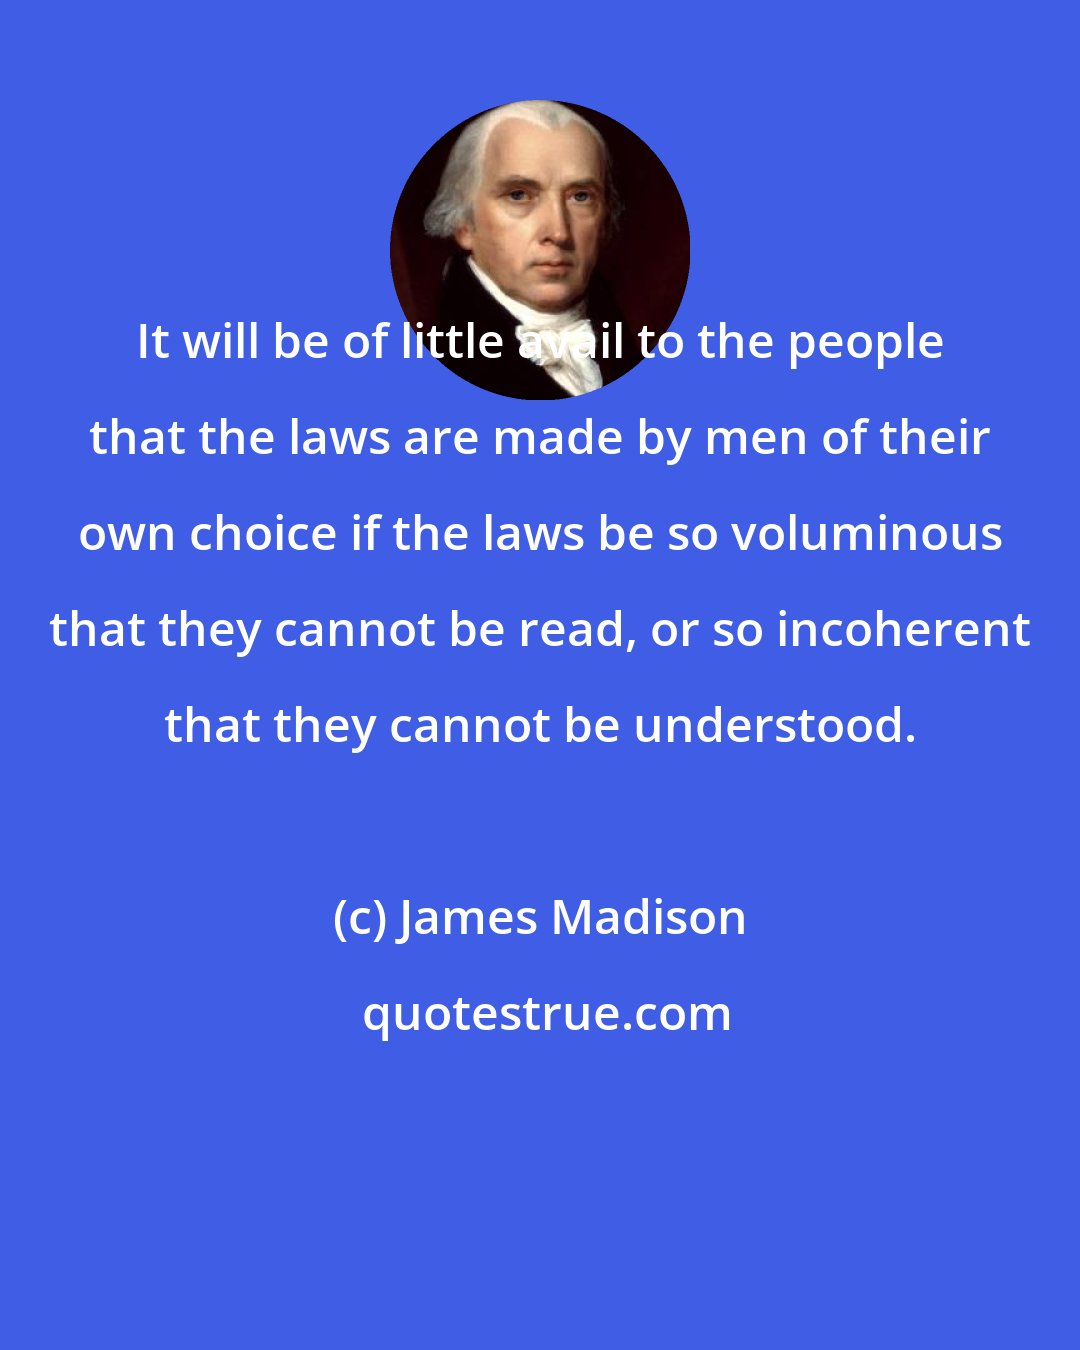 James Madison: It will be of little avail to the people that the laws are made by men of their own choice if the laws be so voluminous that they cannot be read, or so incoherent that they cannot be understood.